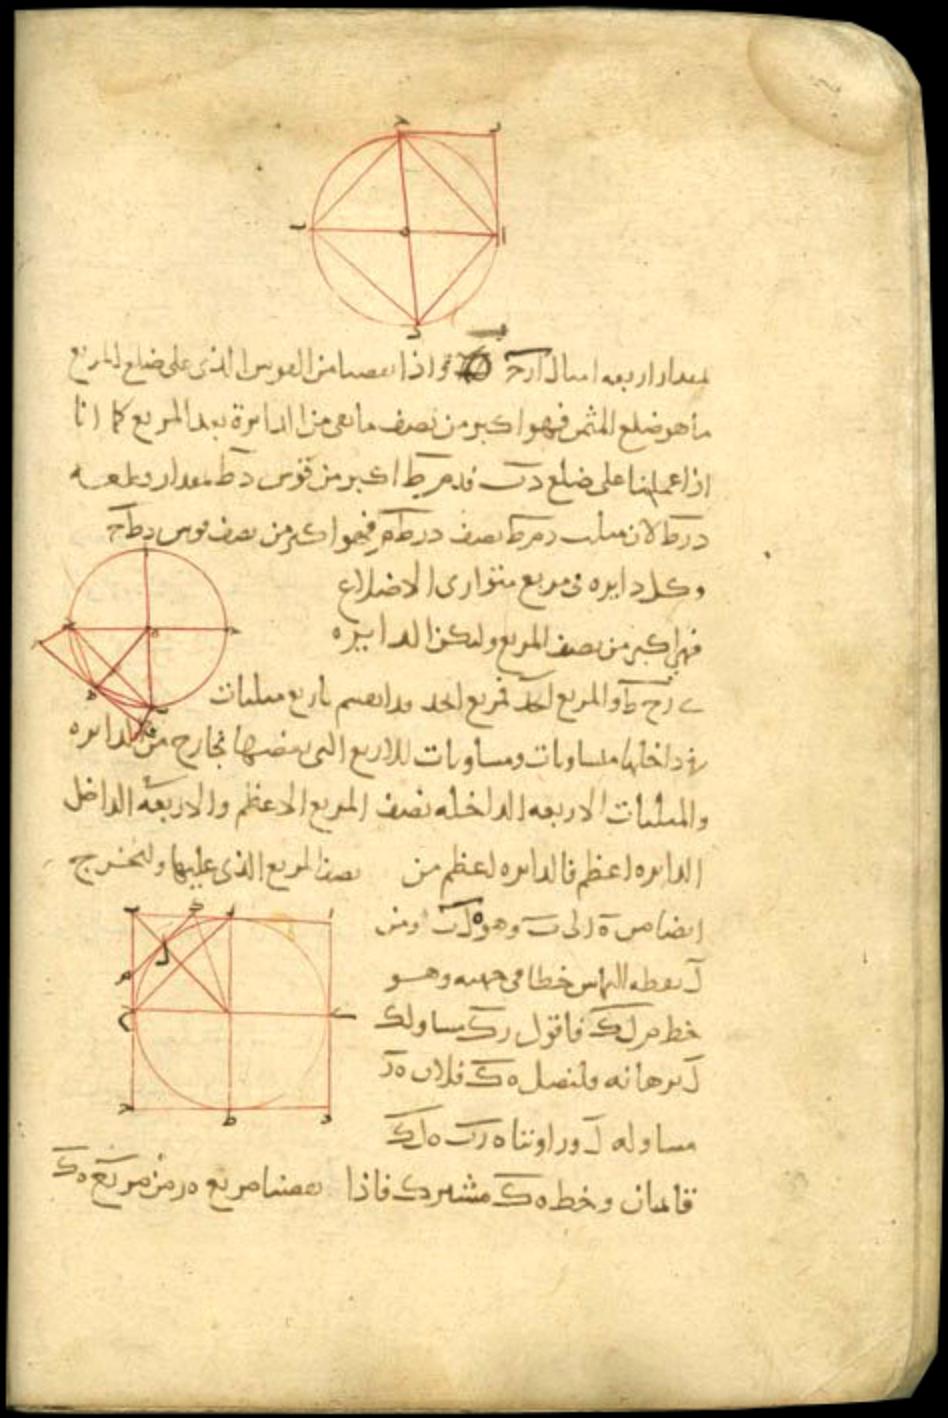 Al-Tusi's Commentary on the Elements